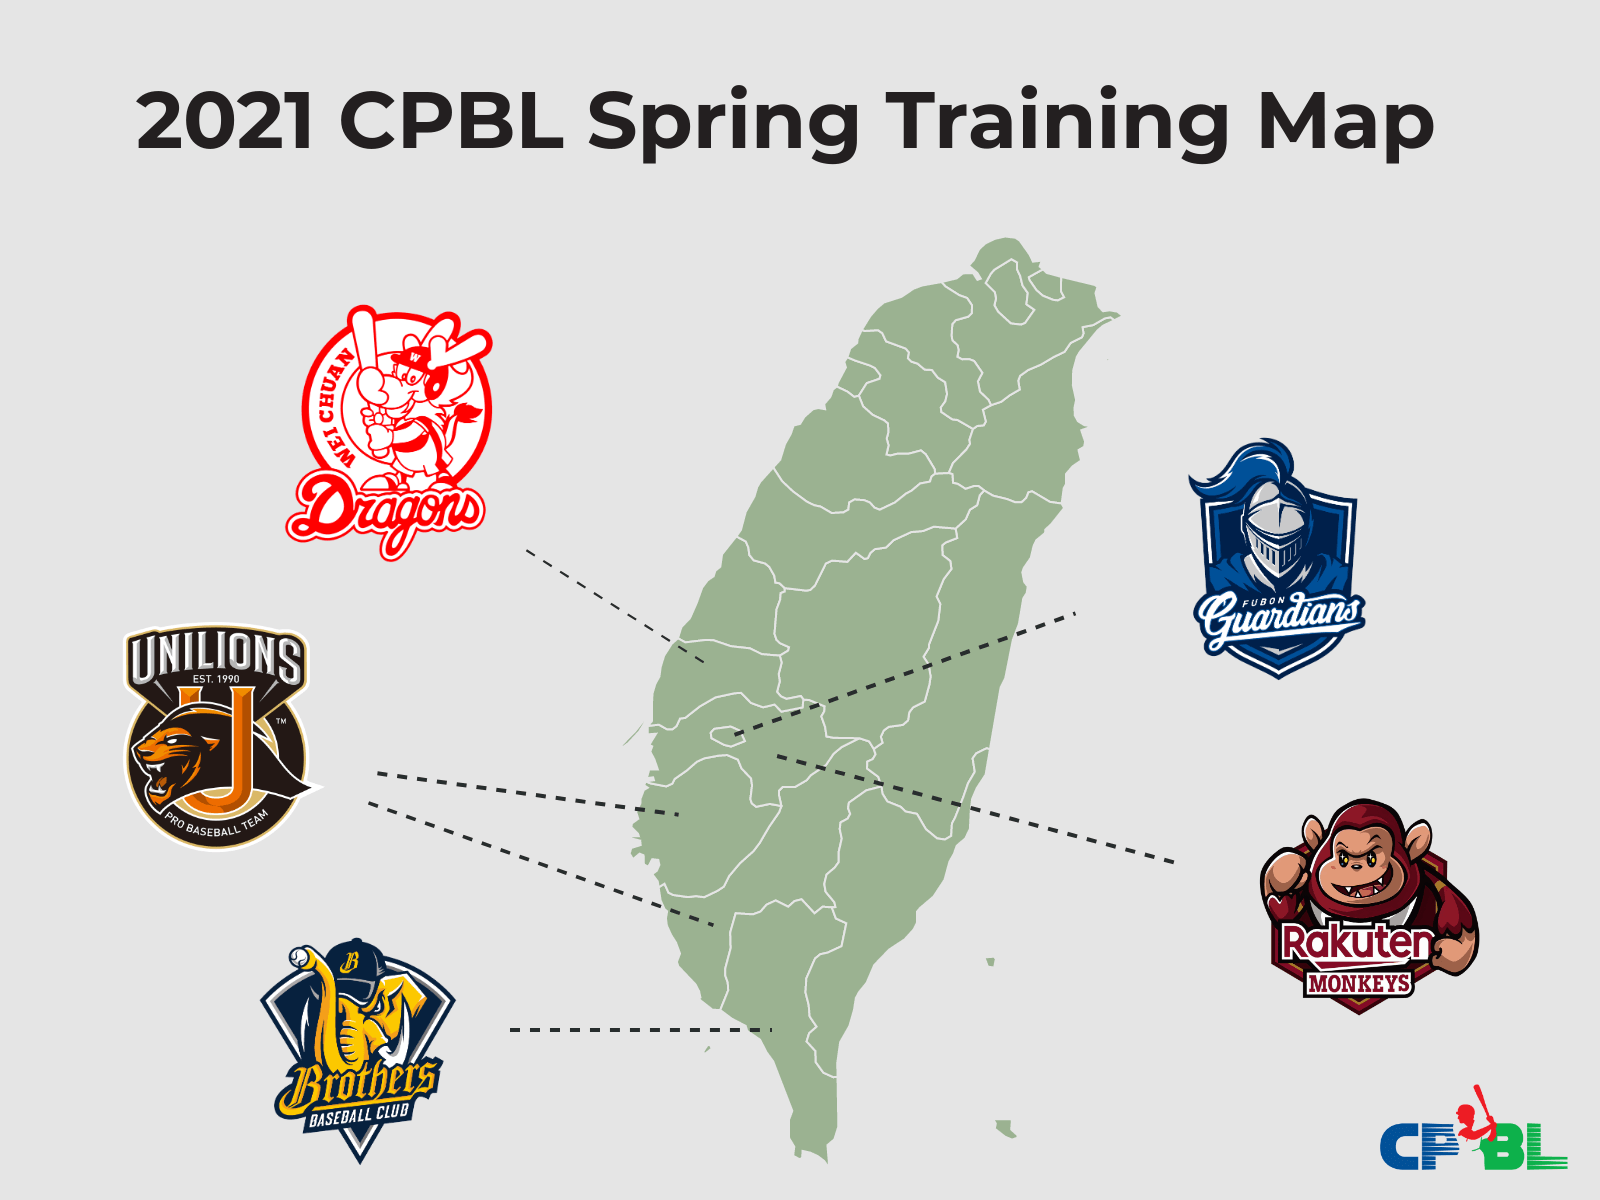 8 CPBL Spring Training Locations   CPBL STATS